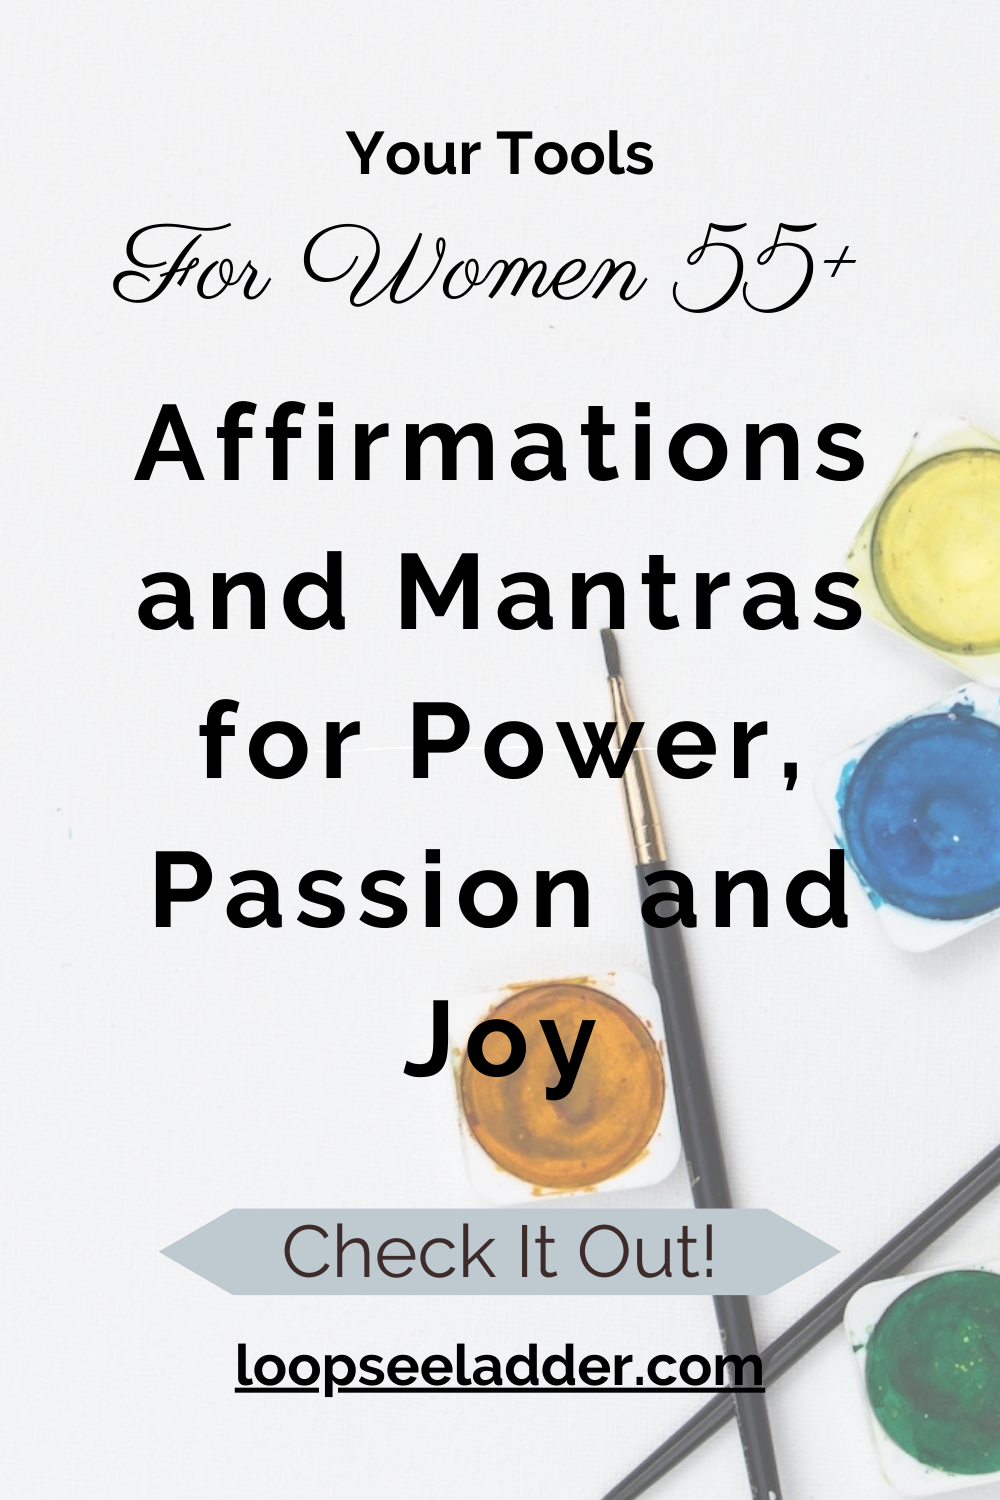 Unleashing the Power Within - How Affirmations and Mantras Can Ignite Passion and Joy in Women 55+